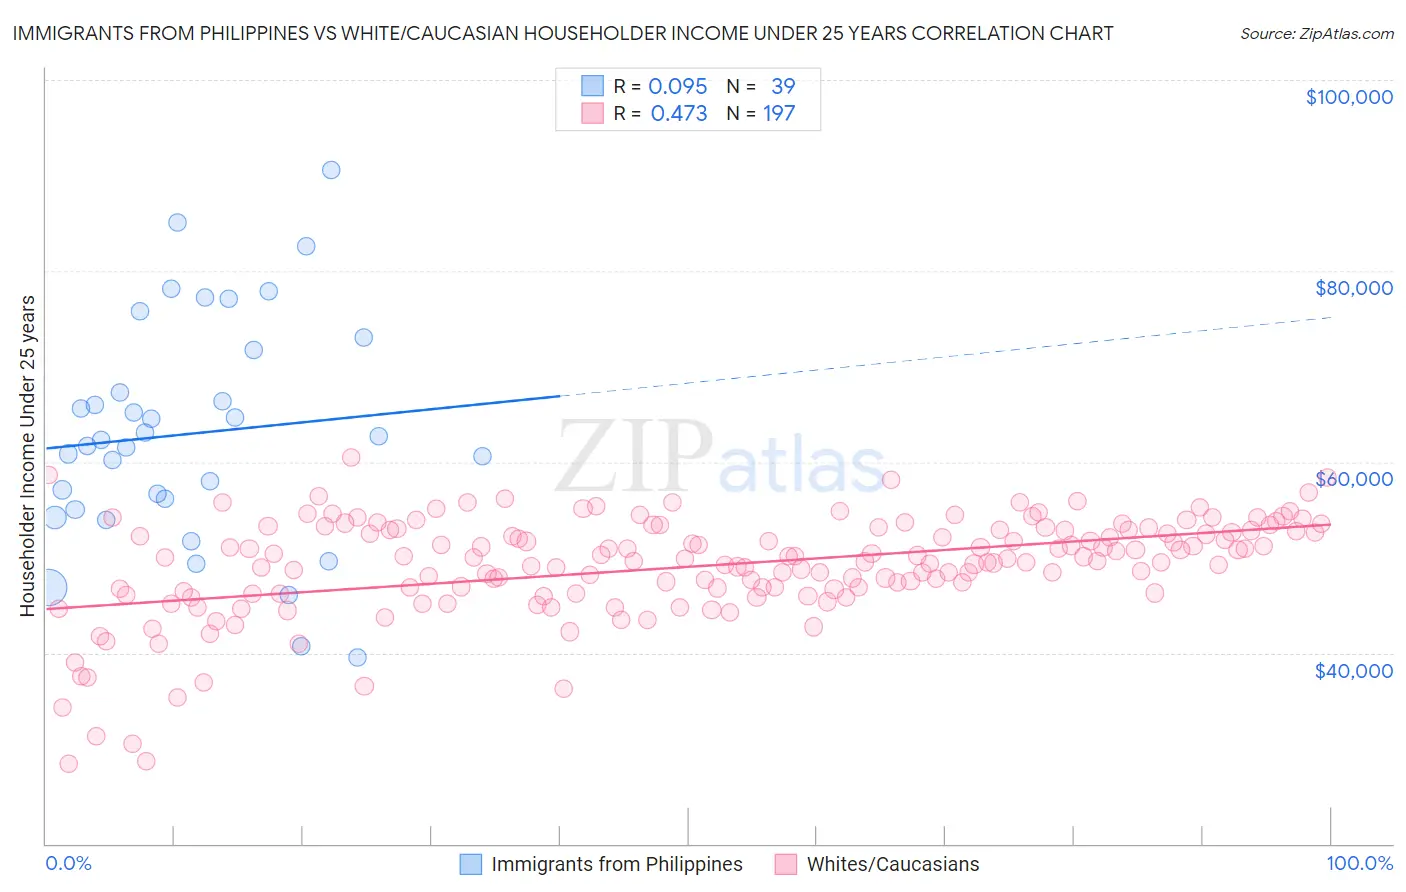 Immigrants from Philippines vs White/Caucasian Householder Income Under 25 years